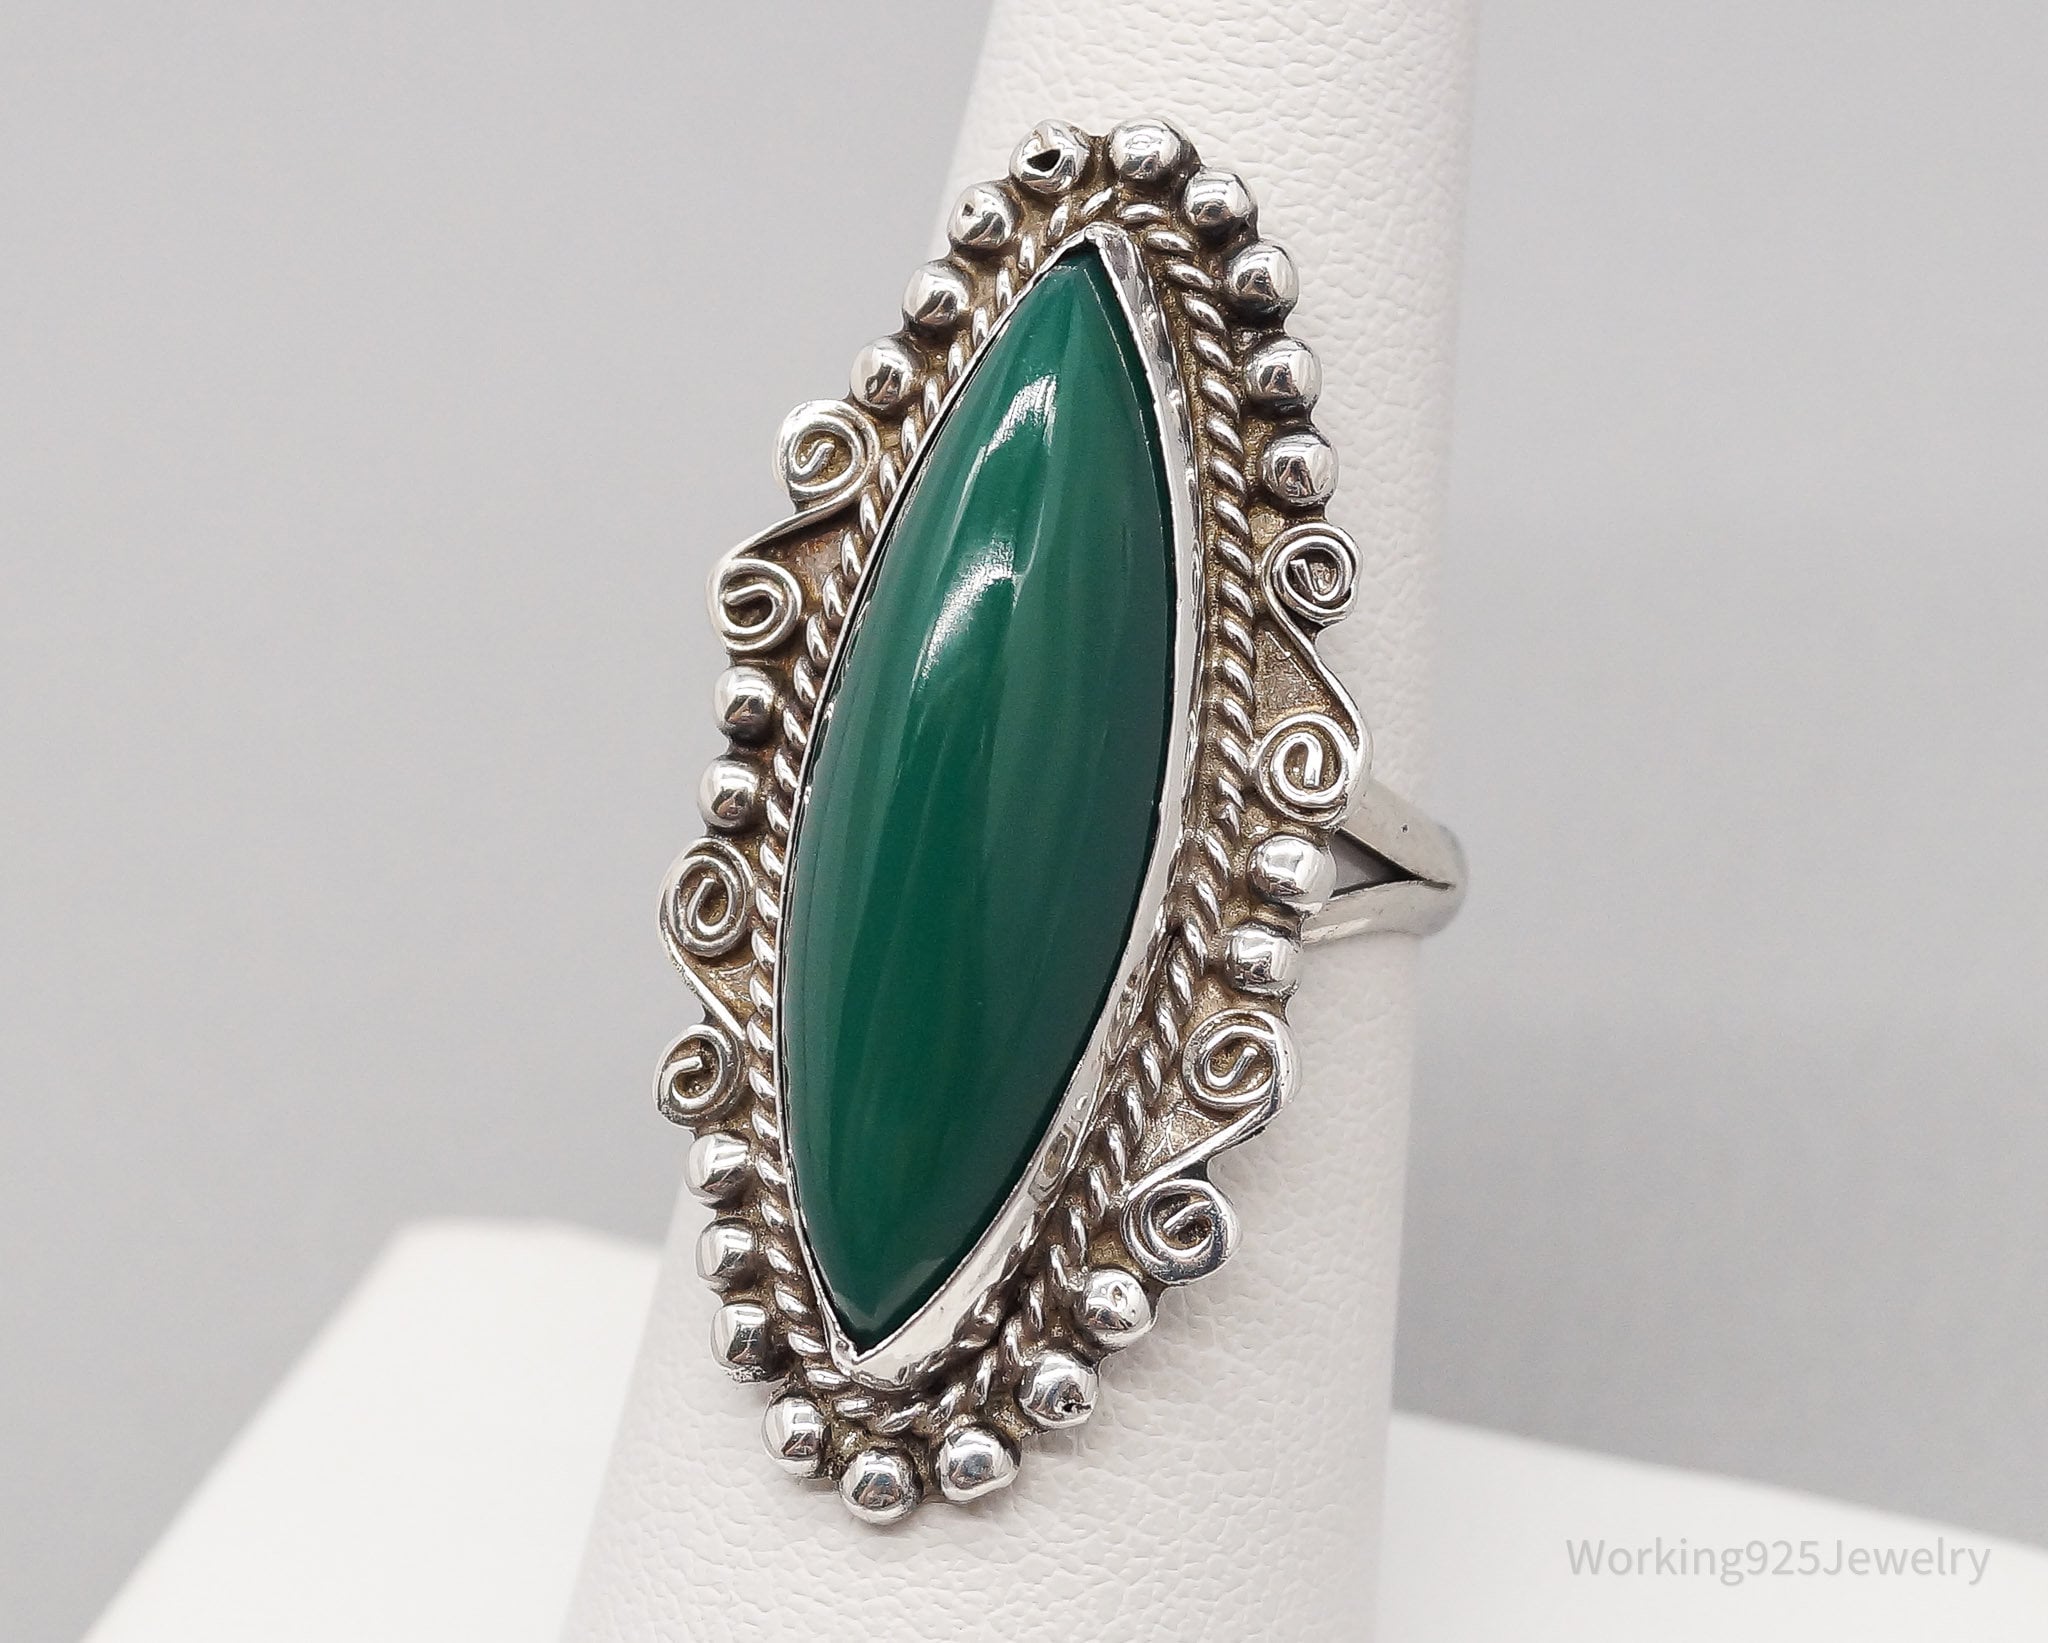 Vintage Mexico Green Onyx Southwestern Silver Ring - Size 6.25